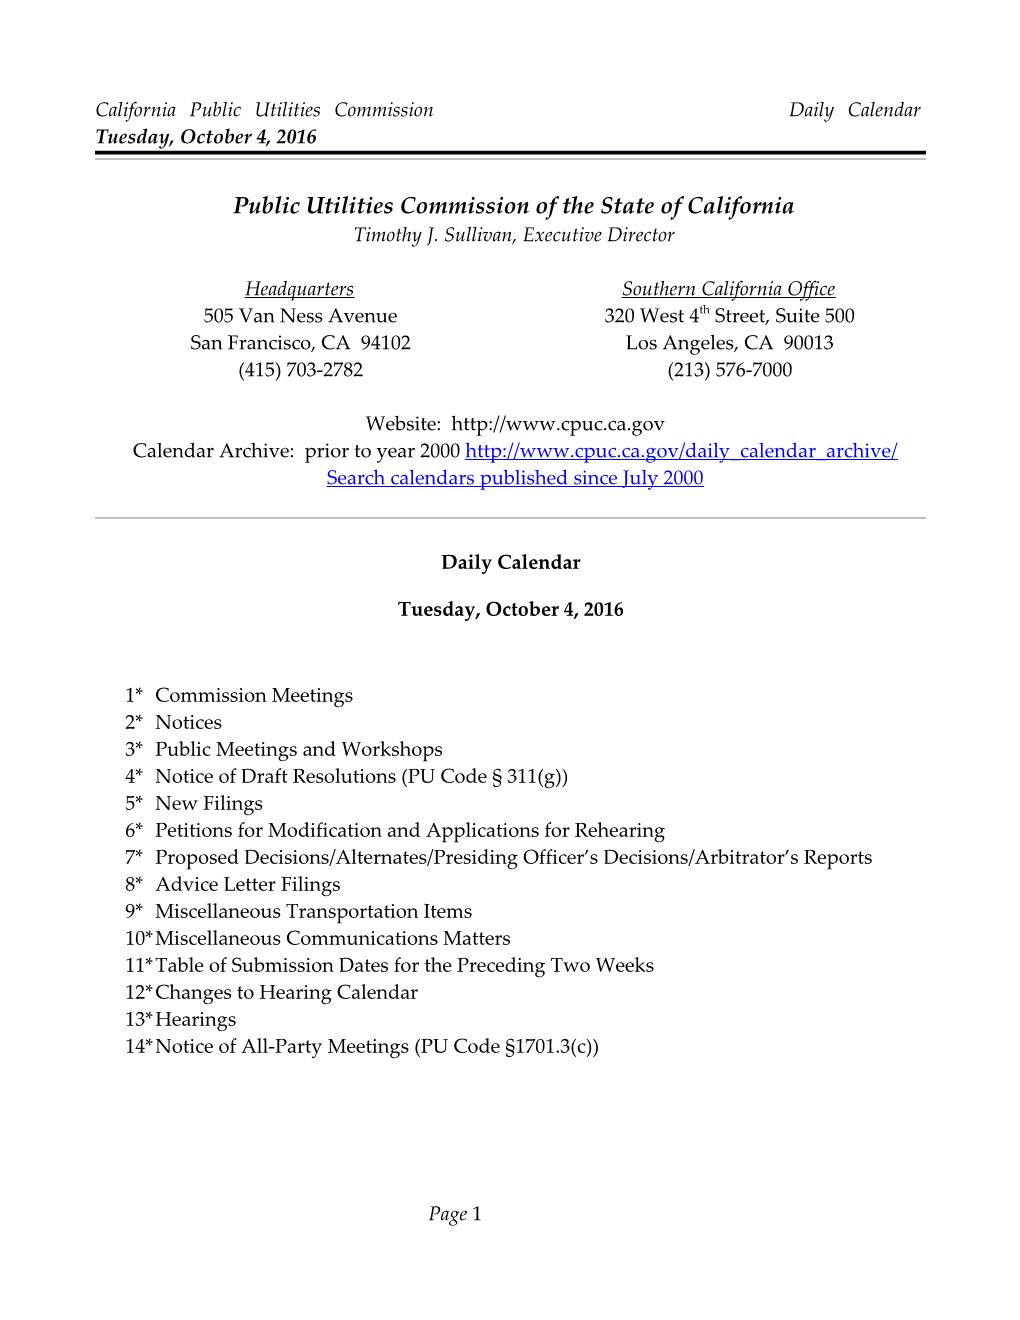 California Public Utilities Commission Daily Calendar Tuesday, October 4, 2016